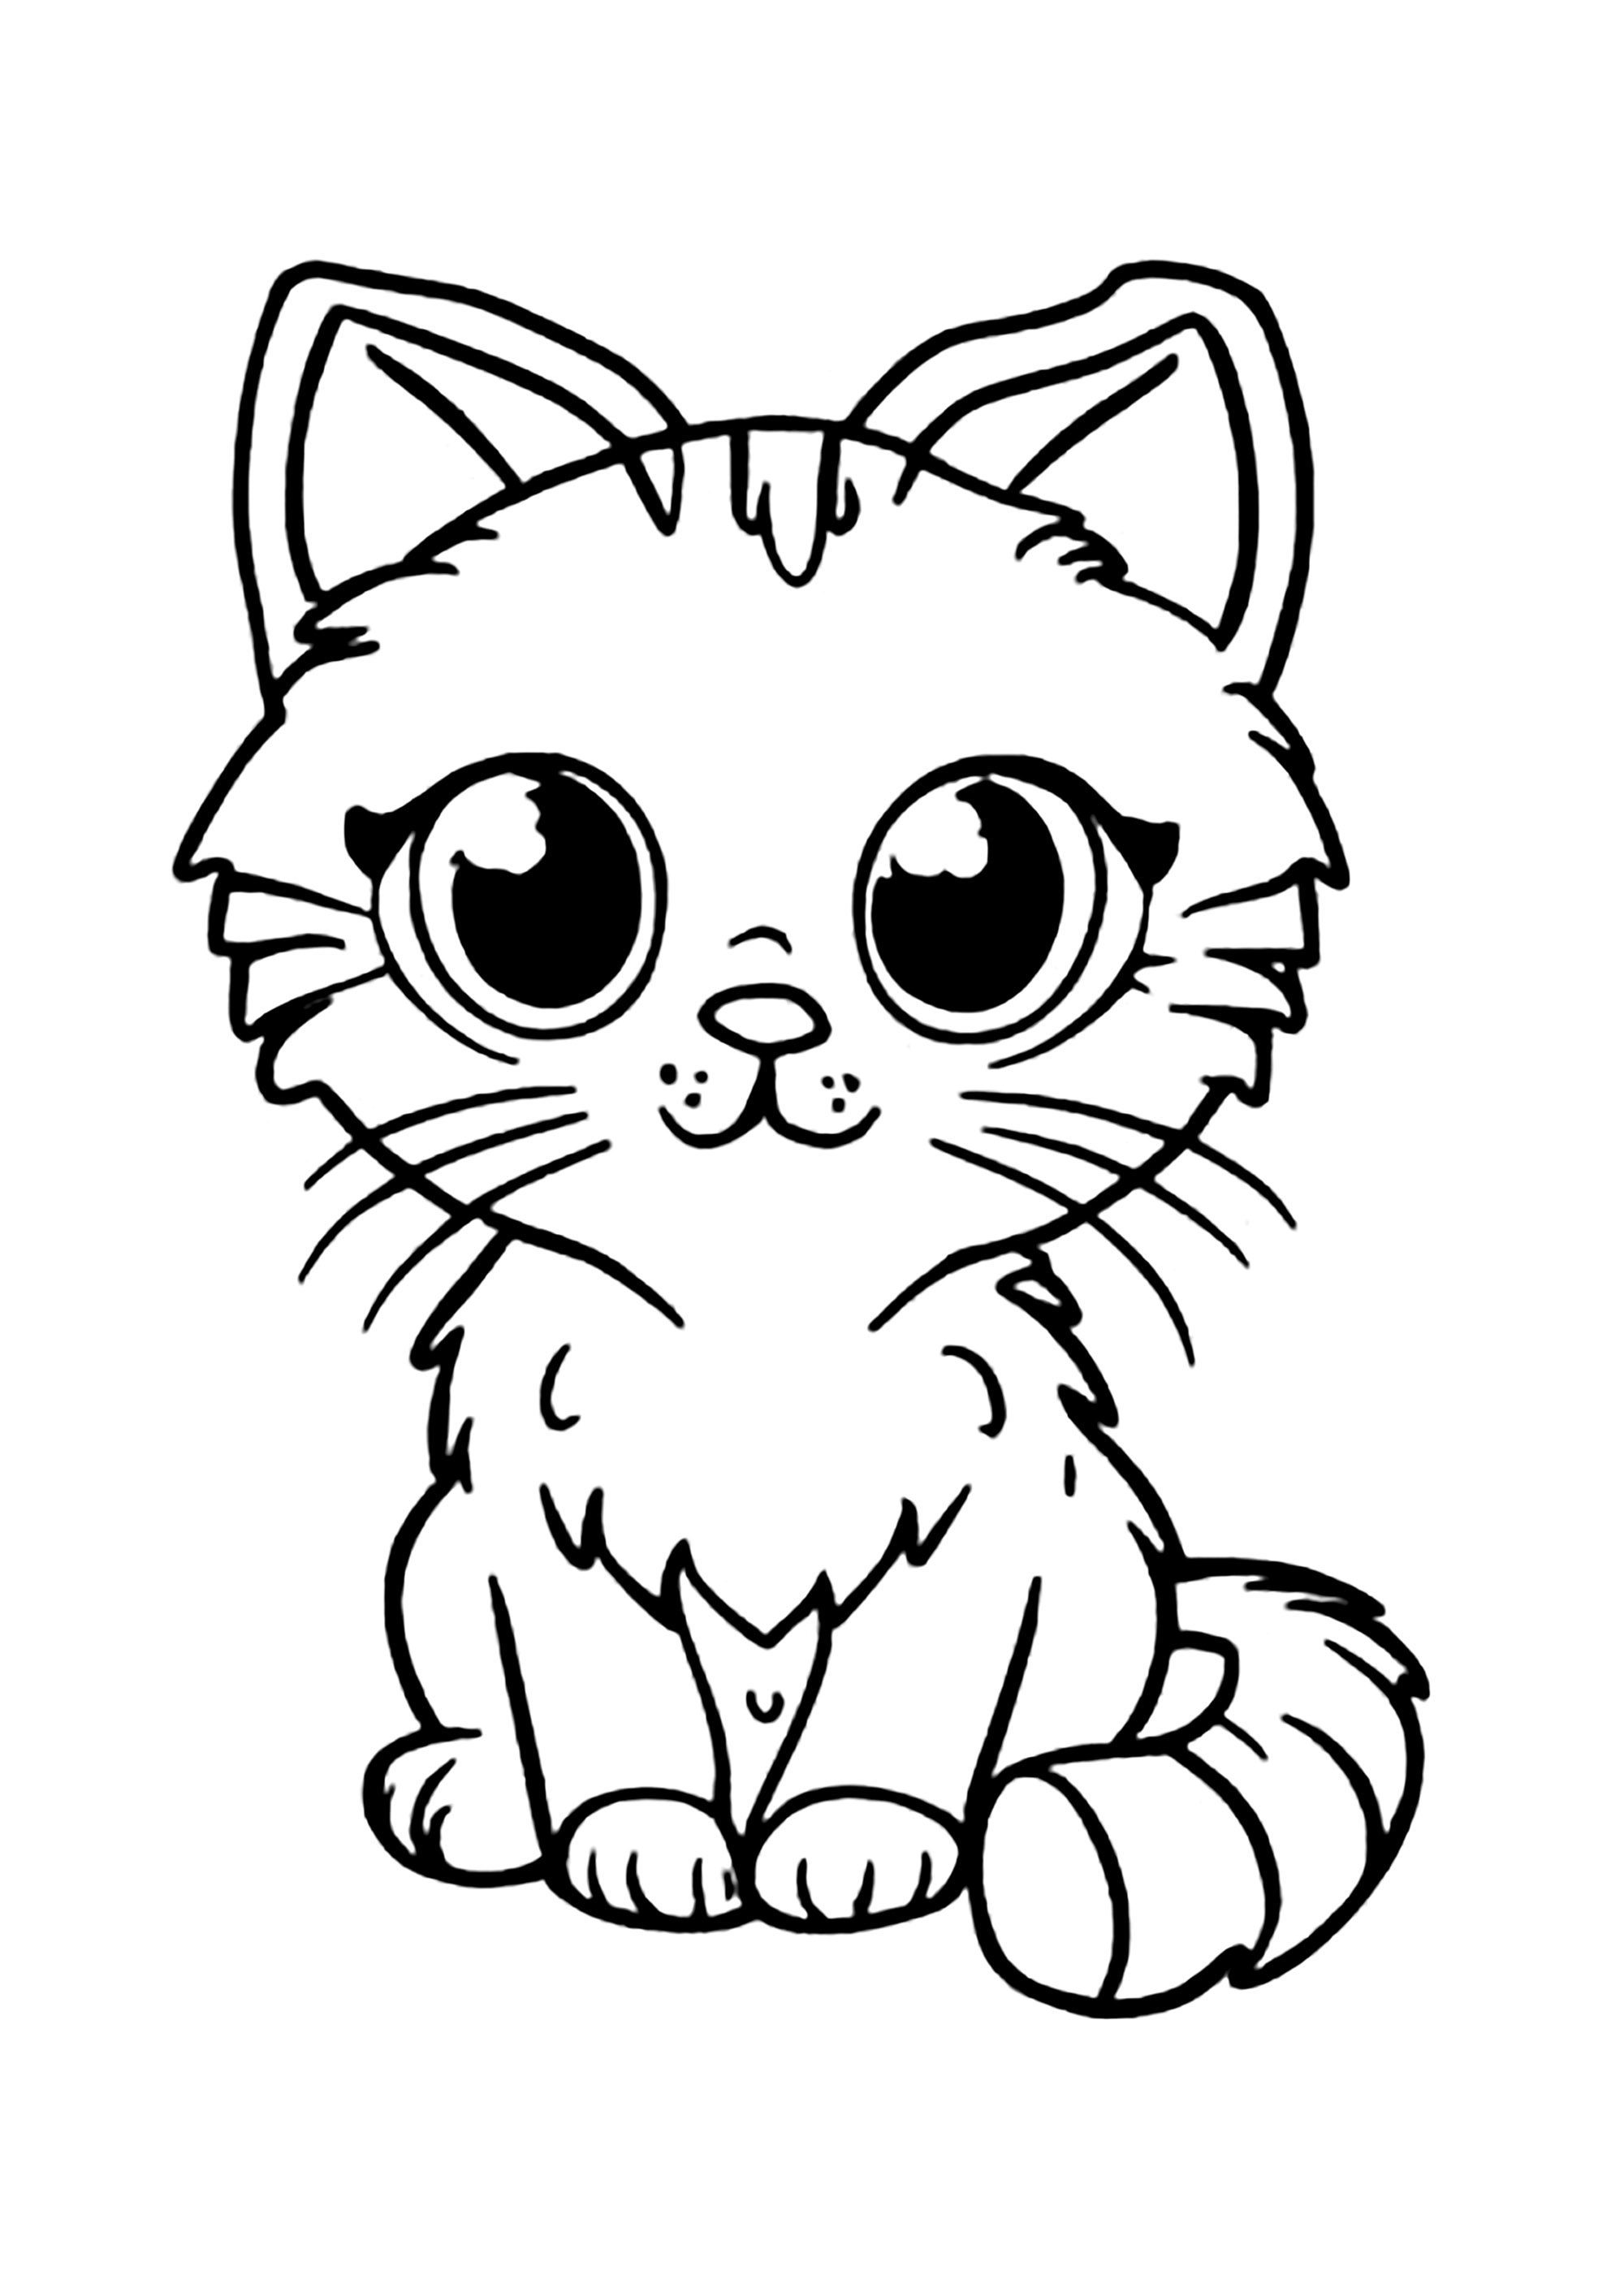 Printable Cats coloring page to print and color